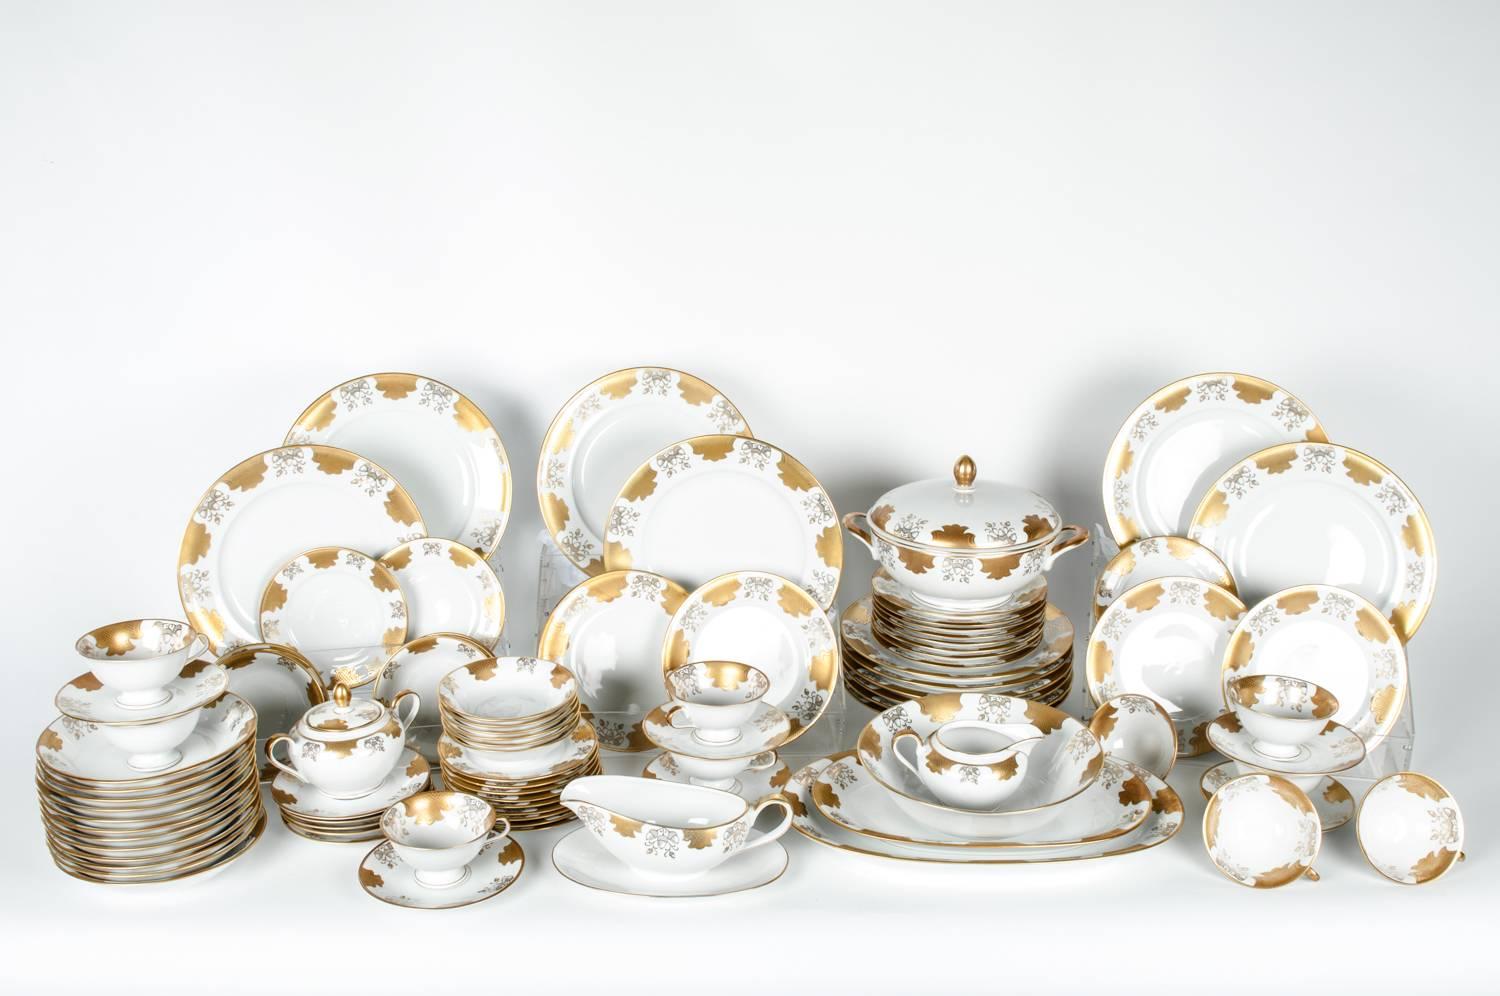 Early 20th Century Antique German Porcelain Dinner Service For Ten People .